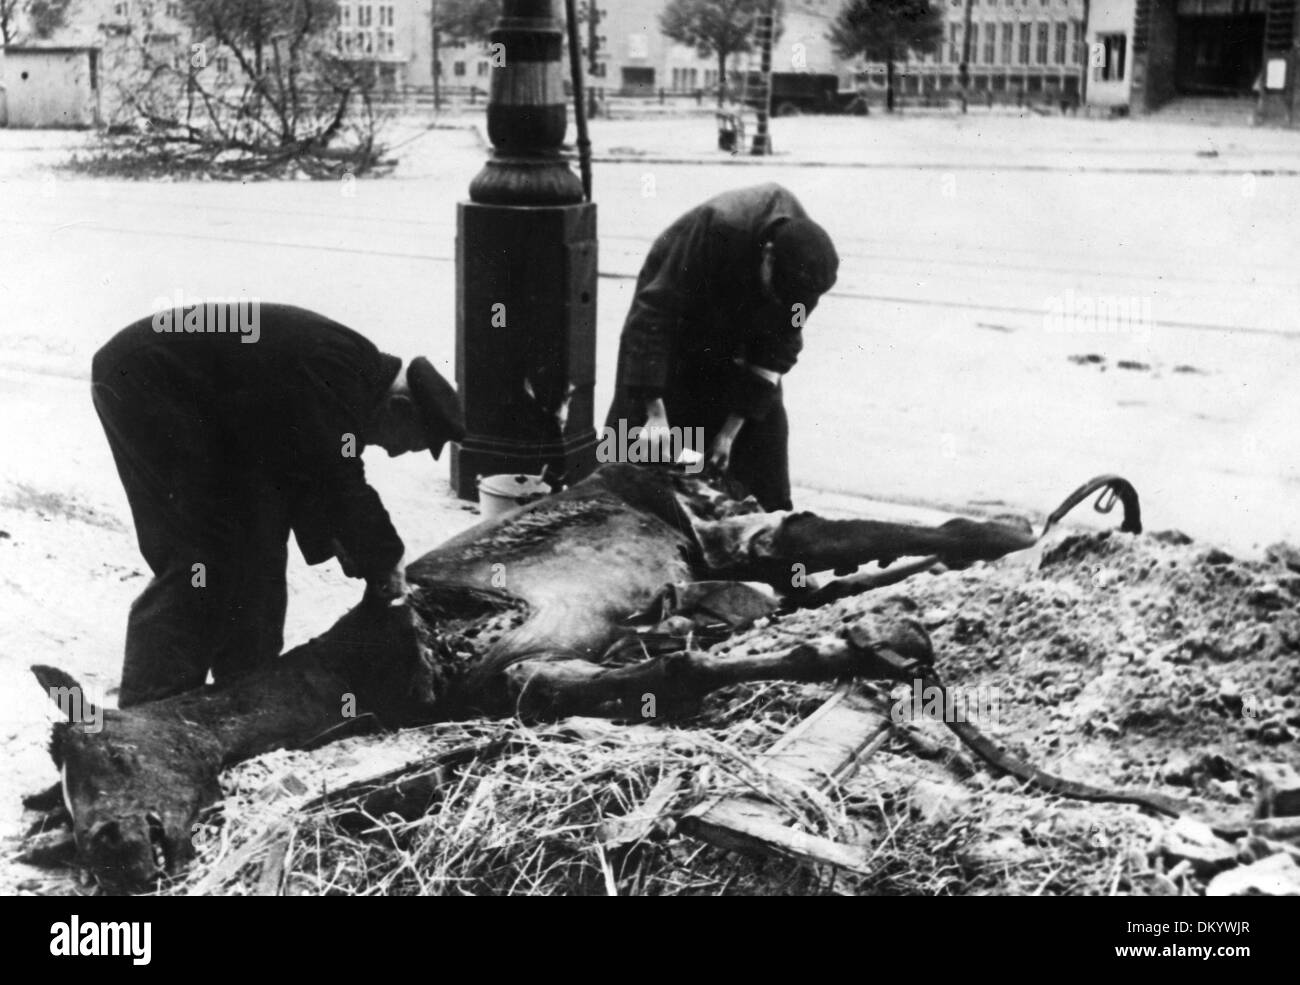 At the end of the war in Berlin in 1945 - A dead horse lying at the side of the street is cut up by men and eaten afterwards. Fotoarchiv für Zeitgeschichte Stock Photo